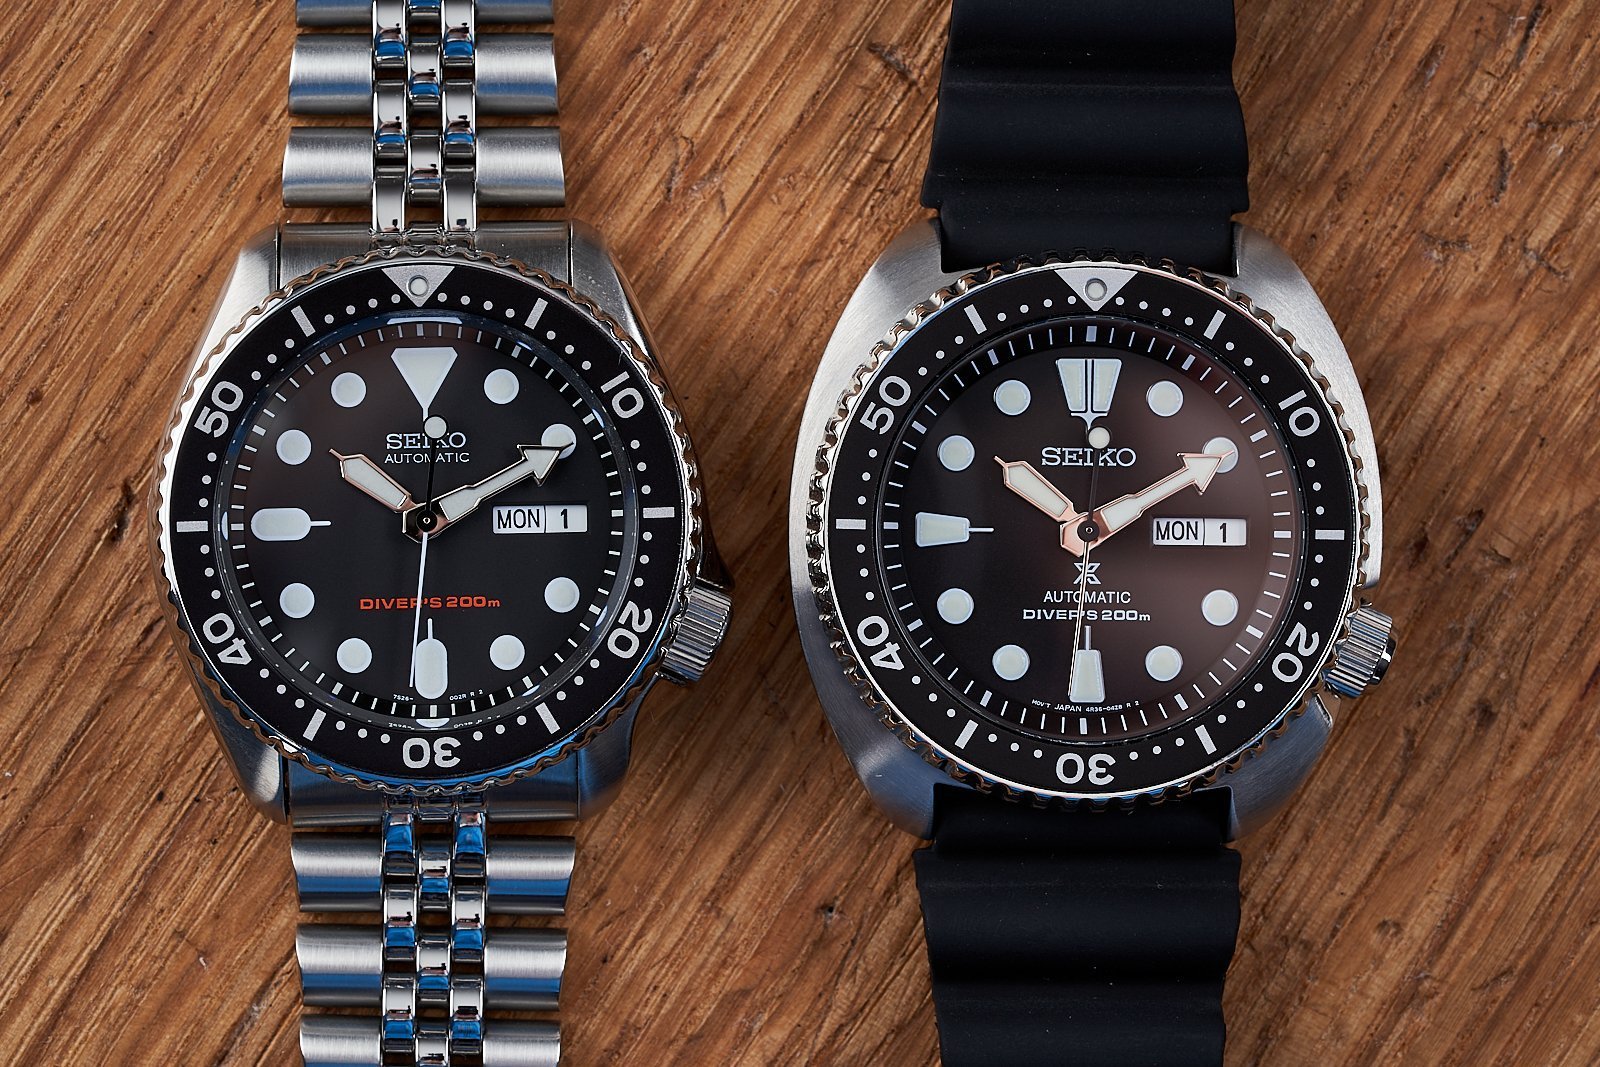 Seiko Turtle and Seiko SKX - Side By Side Overview - Crystaltimes USA